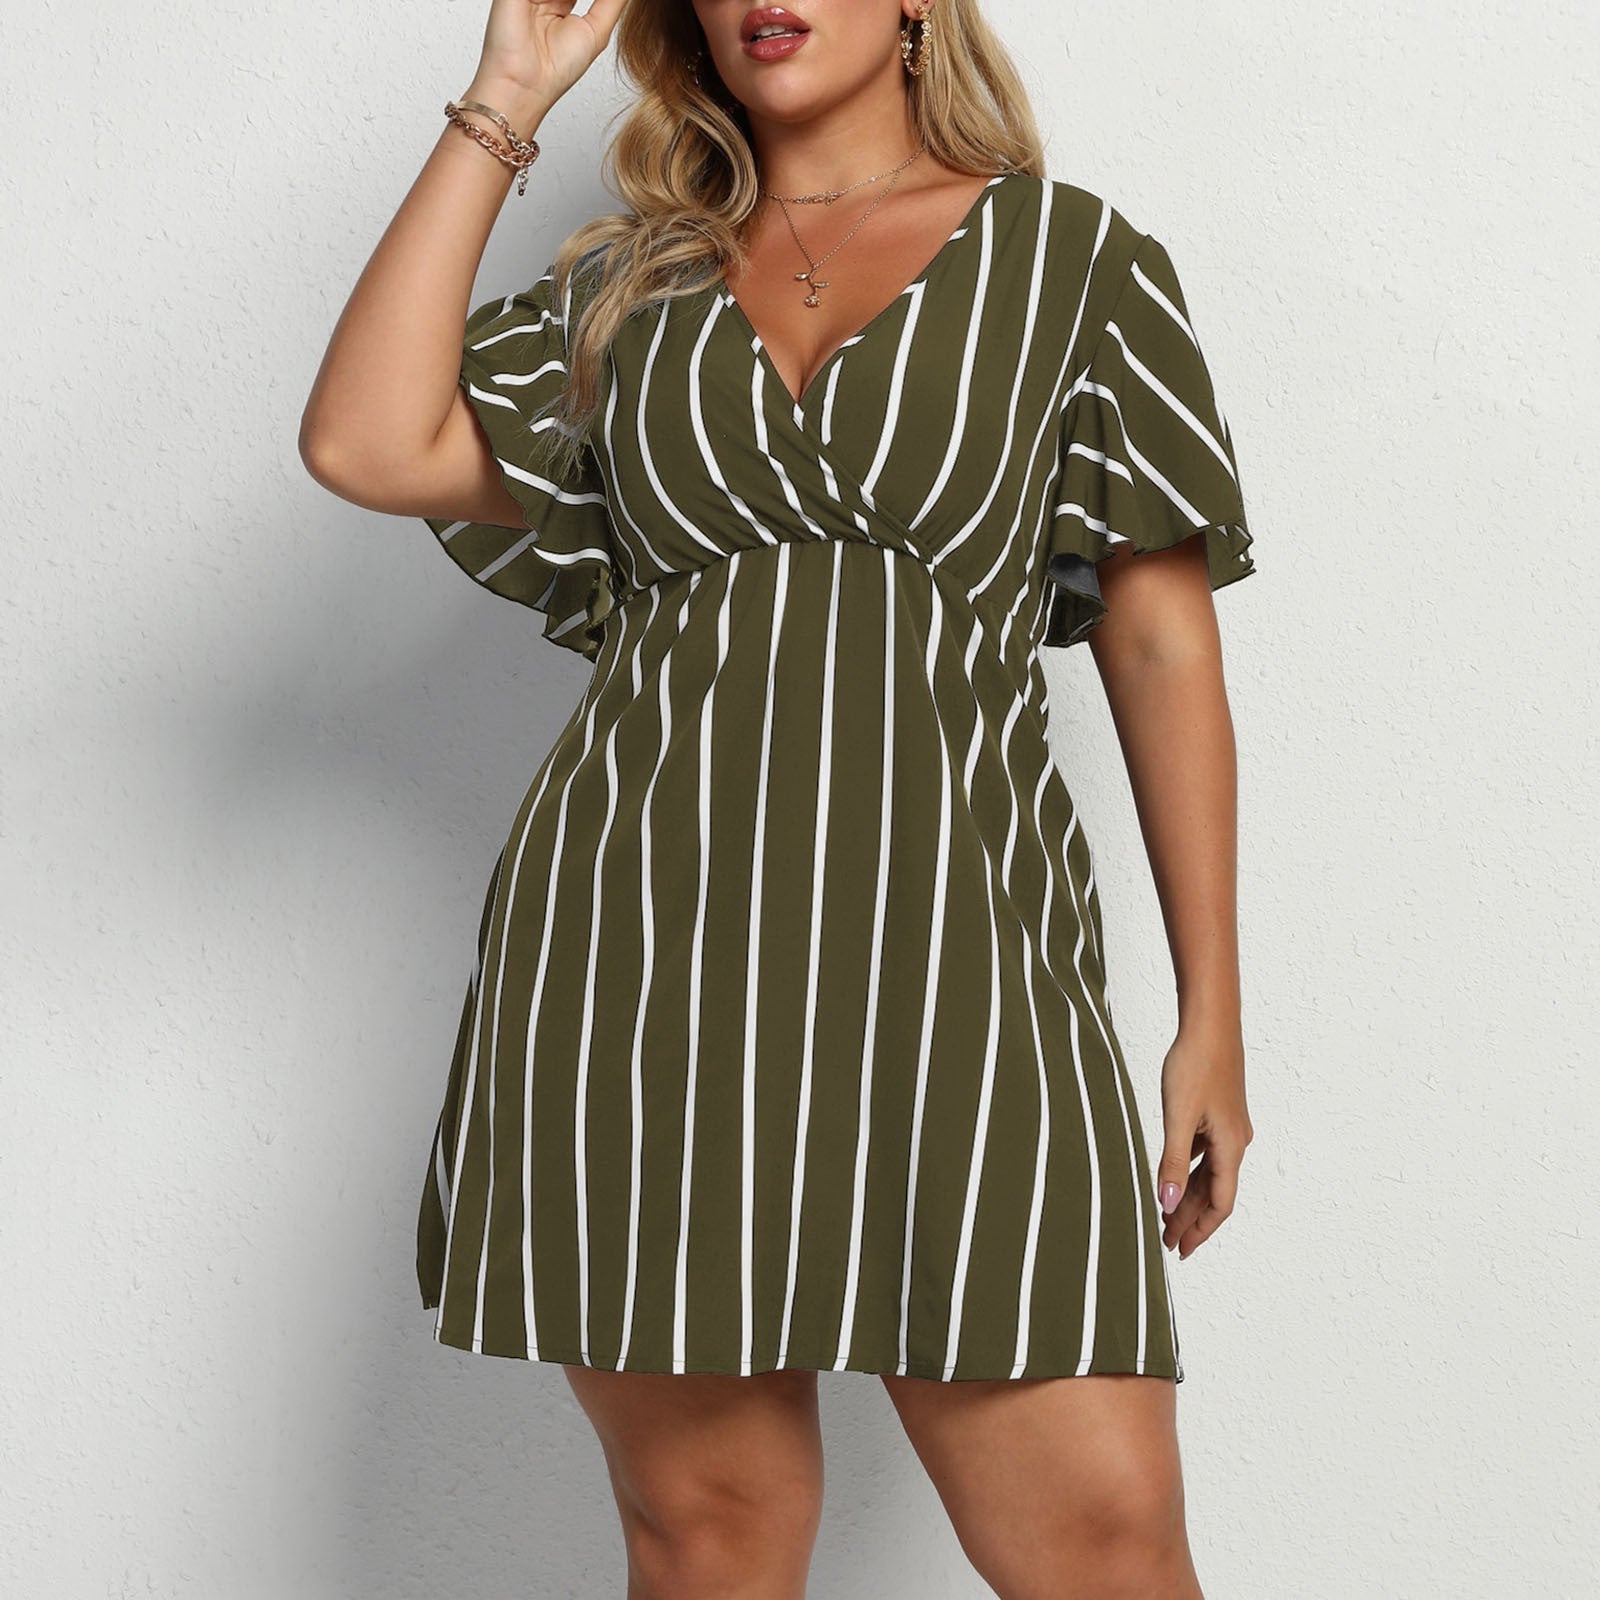 Casual Plus Sizes Boho Short Dresses-Dresses-Army Green-L-Free Shipping at meselling99